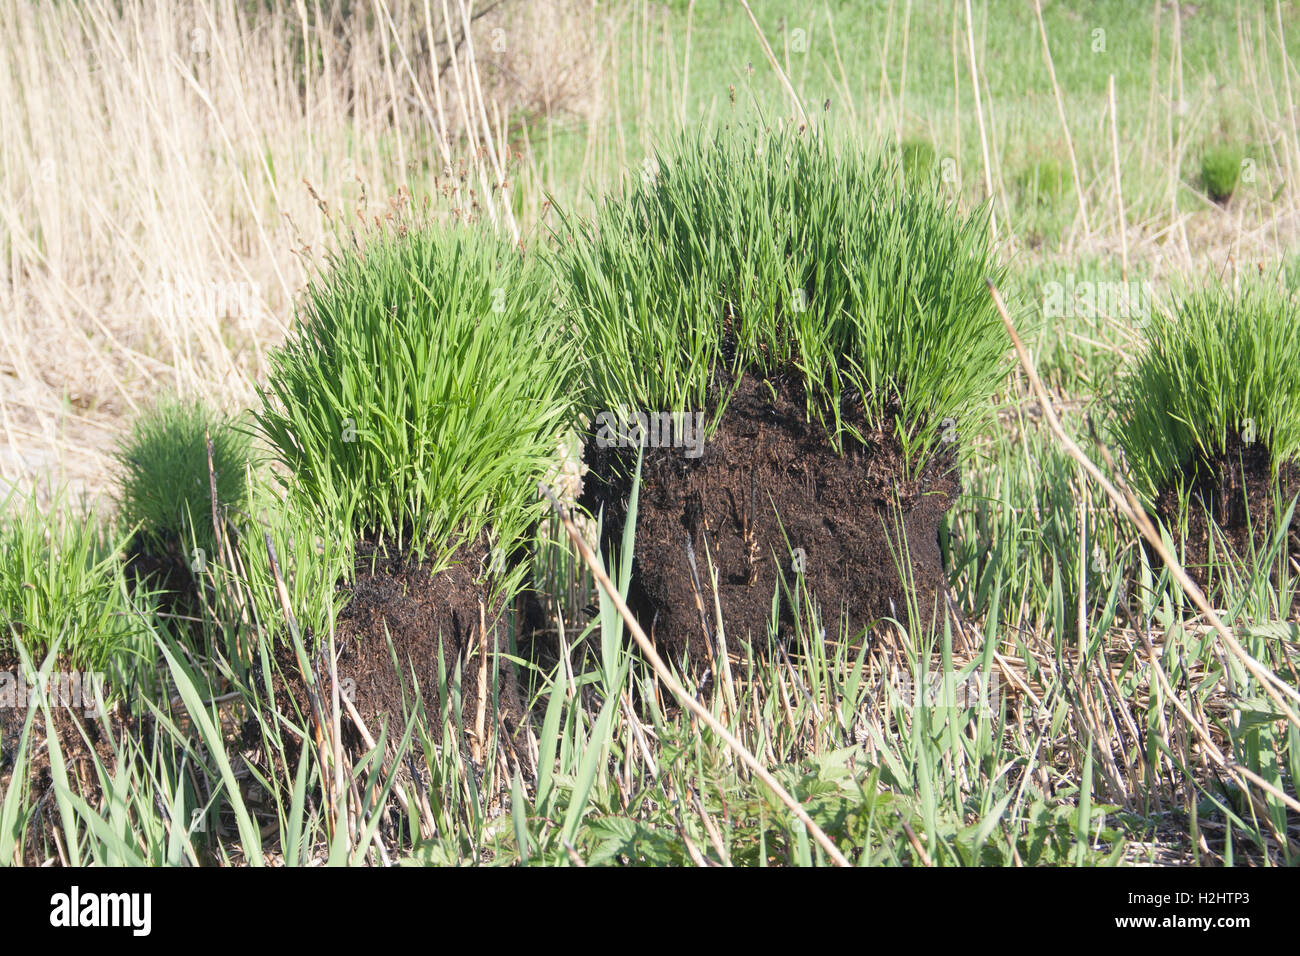 new green grass on brunt mounds Stock Photo